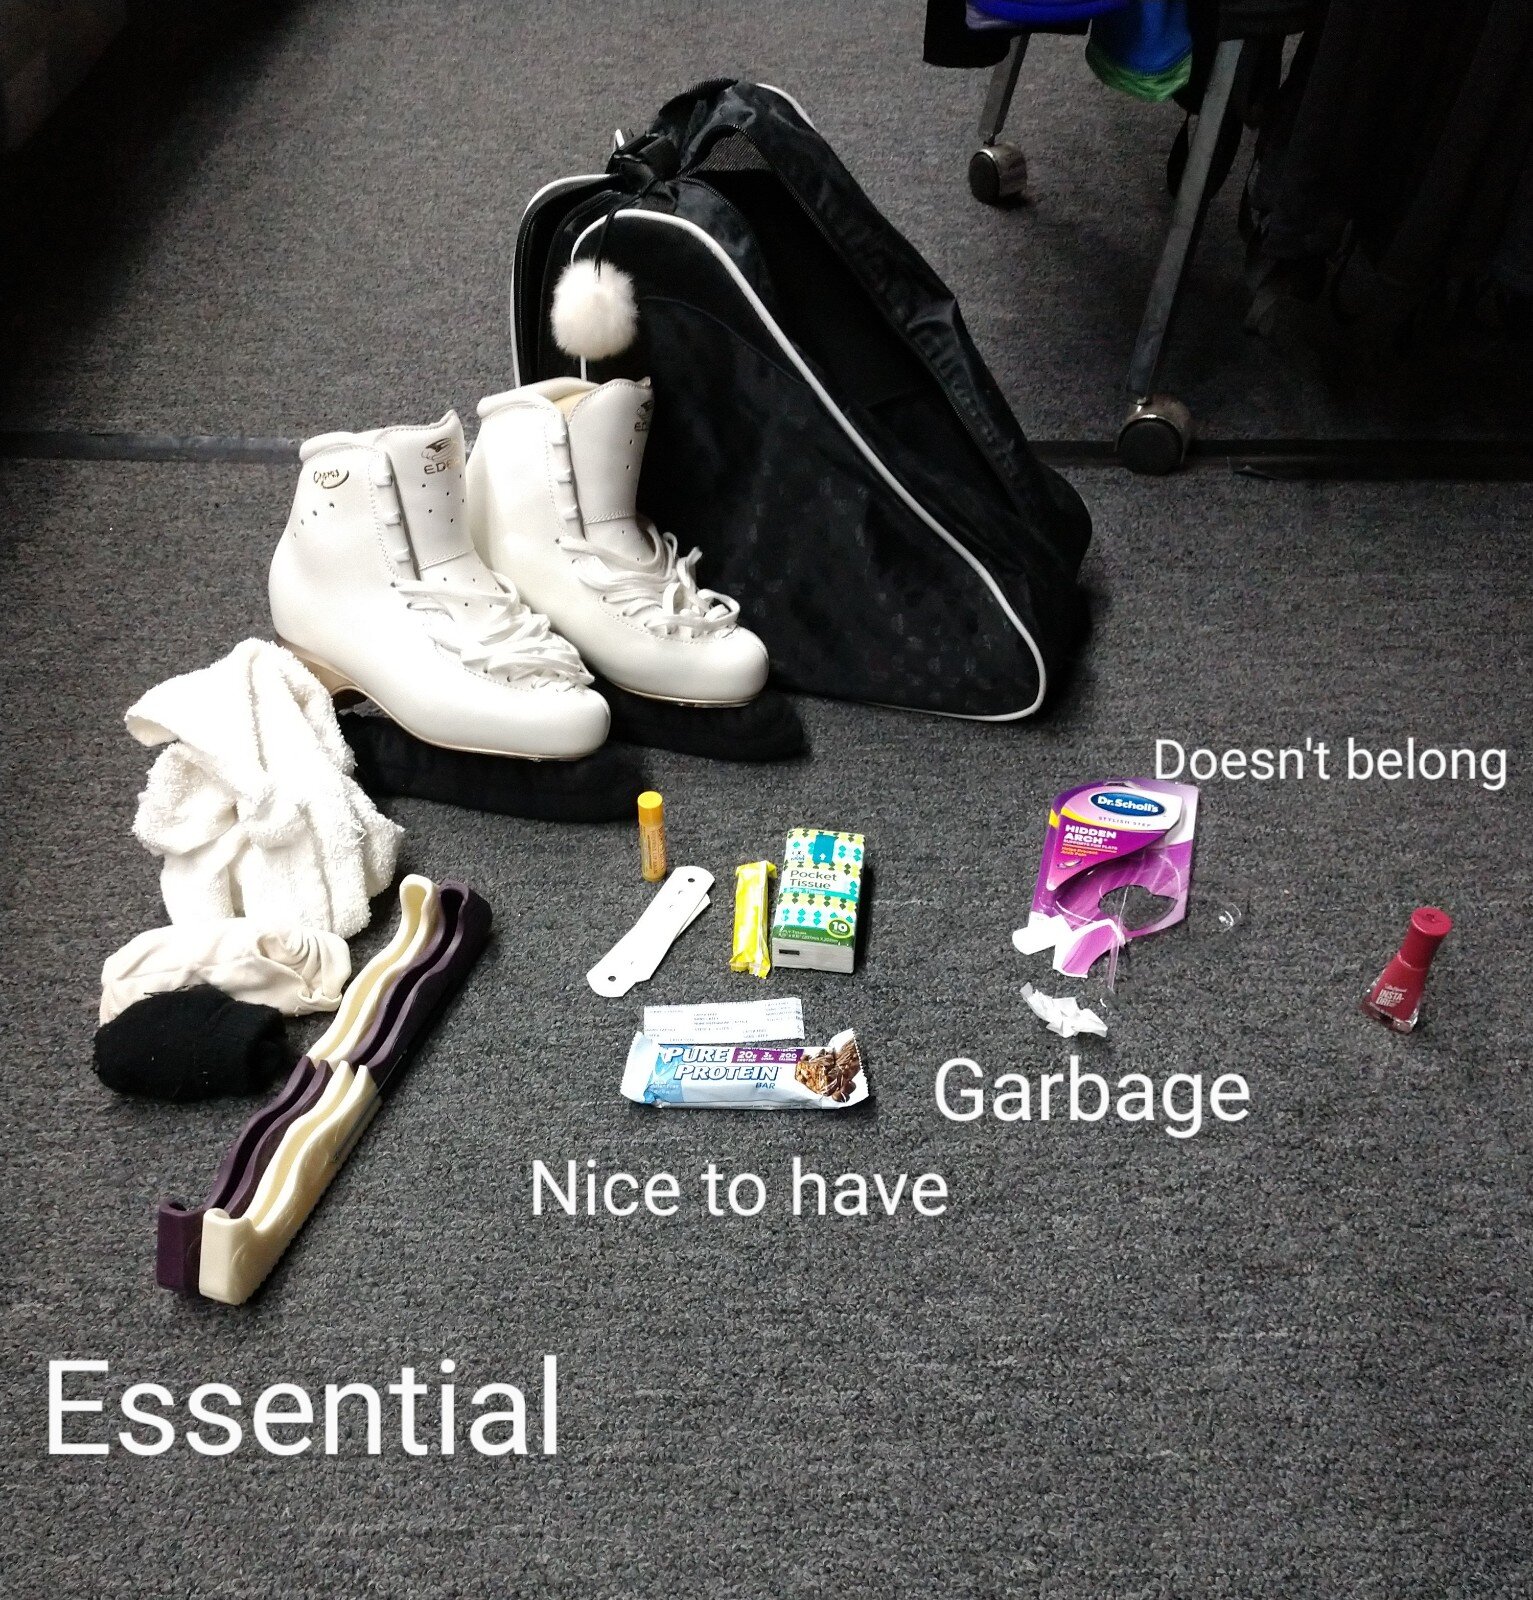 To position Horse Trivial Clean Your Skate Bag In 5 Easy Steps! — The Skater's Edge